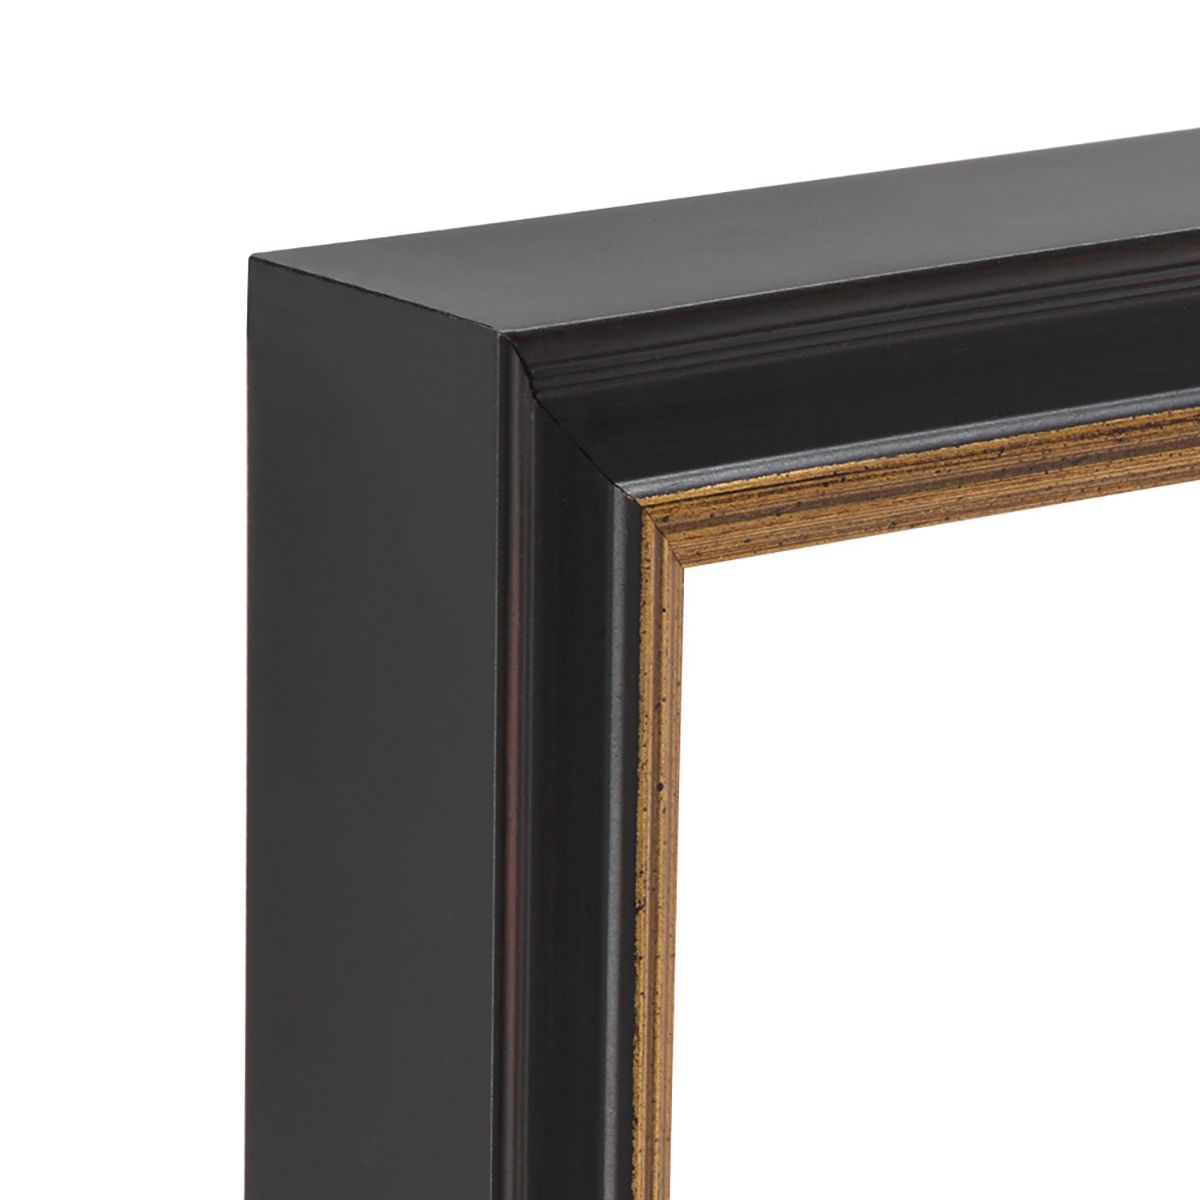 Millbrook Collection: Academy Black 3/4" Frame 14"x17" With Glass